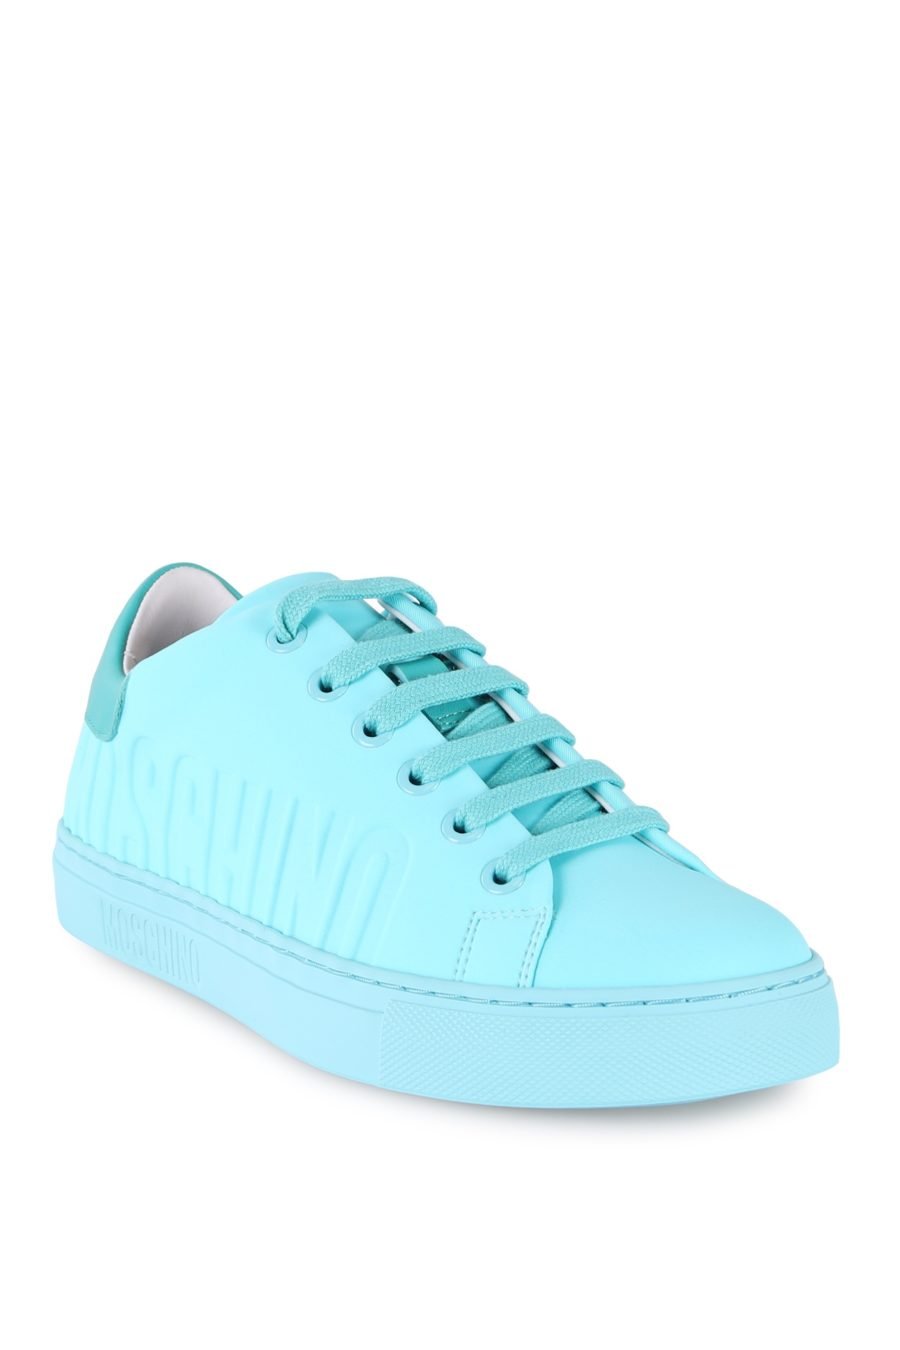 Trainers Moschino Couture in turquoise - aa5750ef7a85a3be2368269441bde7ed319b5f82